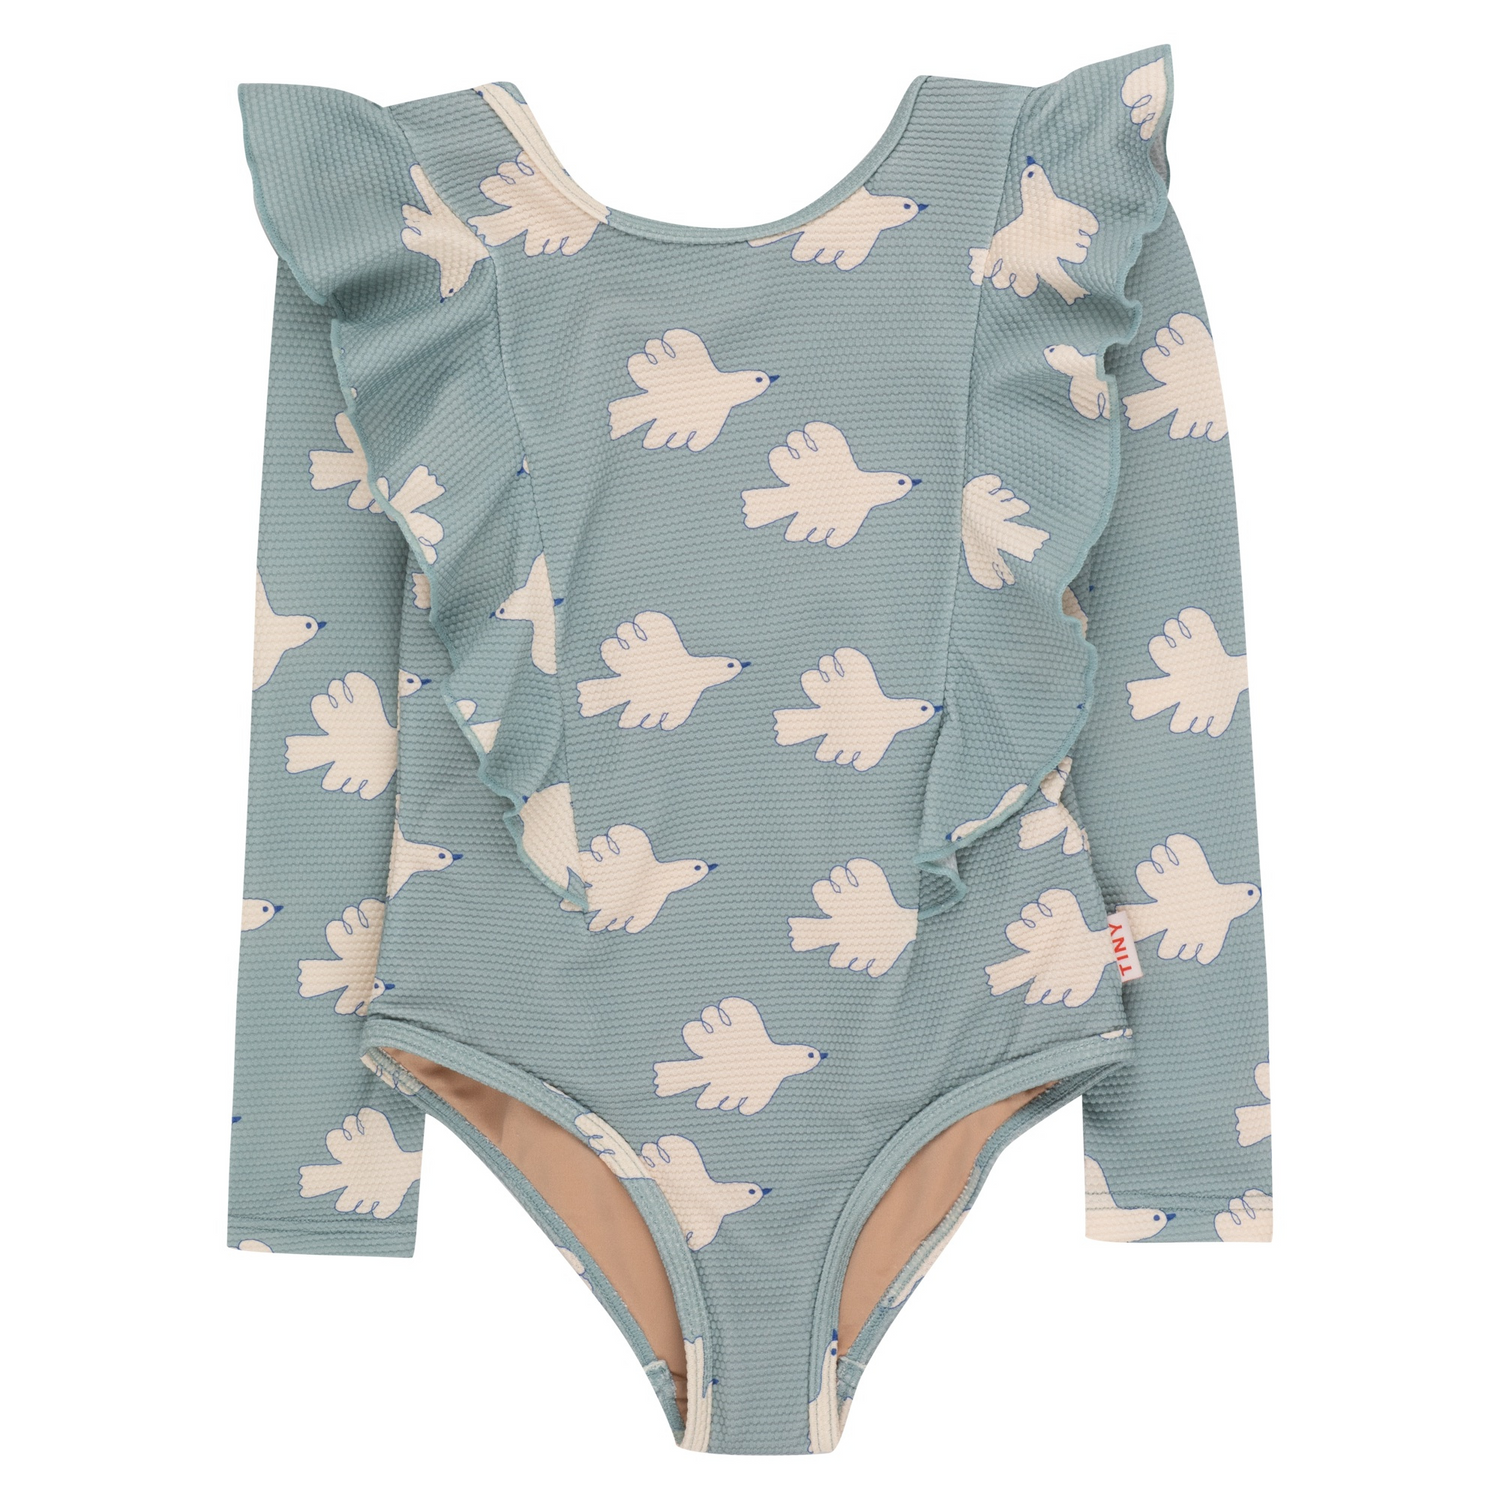 Swimsuit - Doves with long sleeves